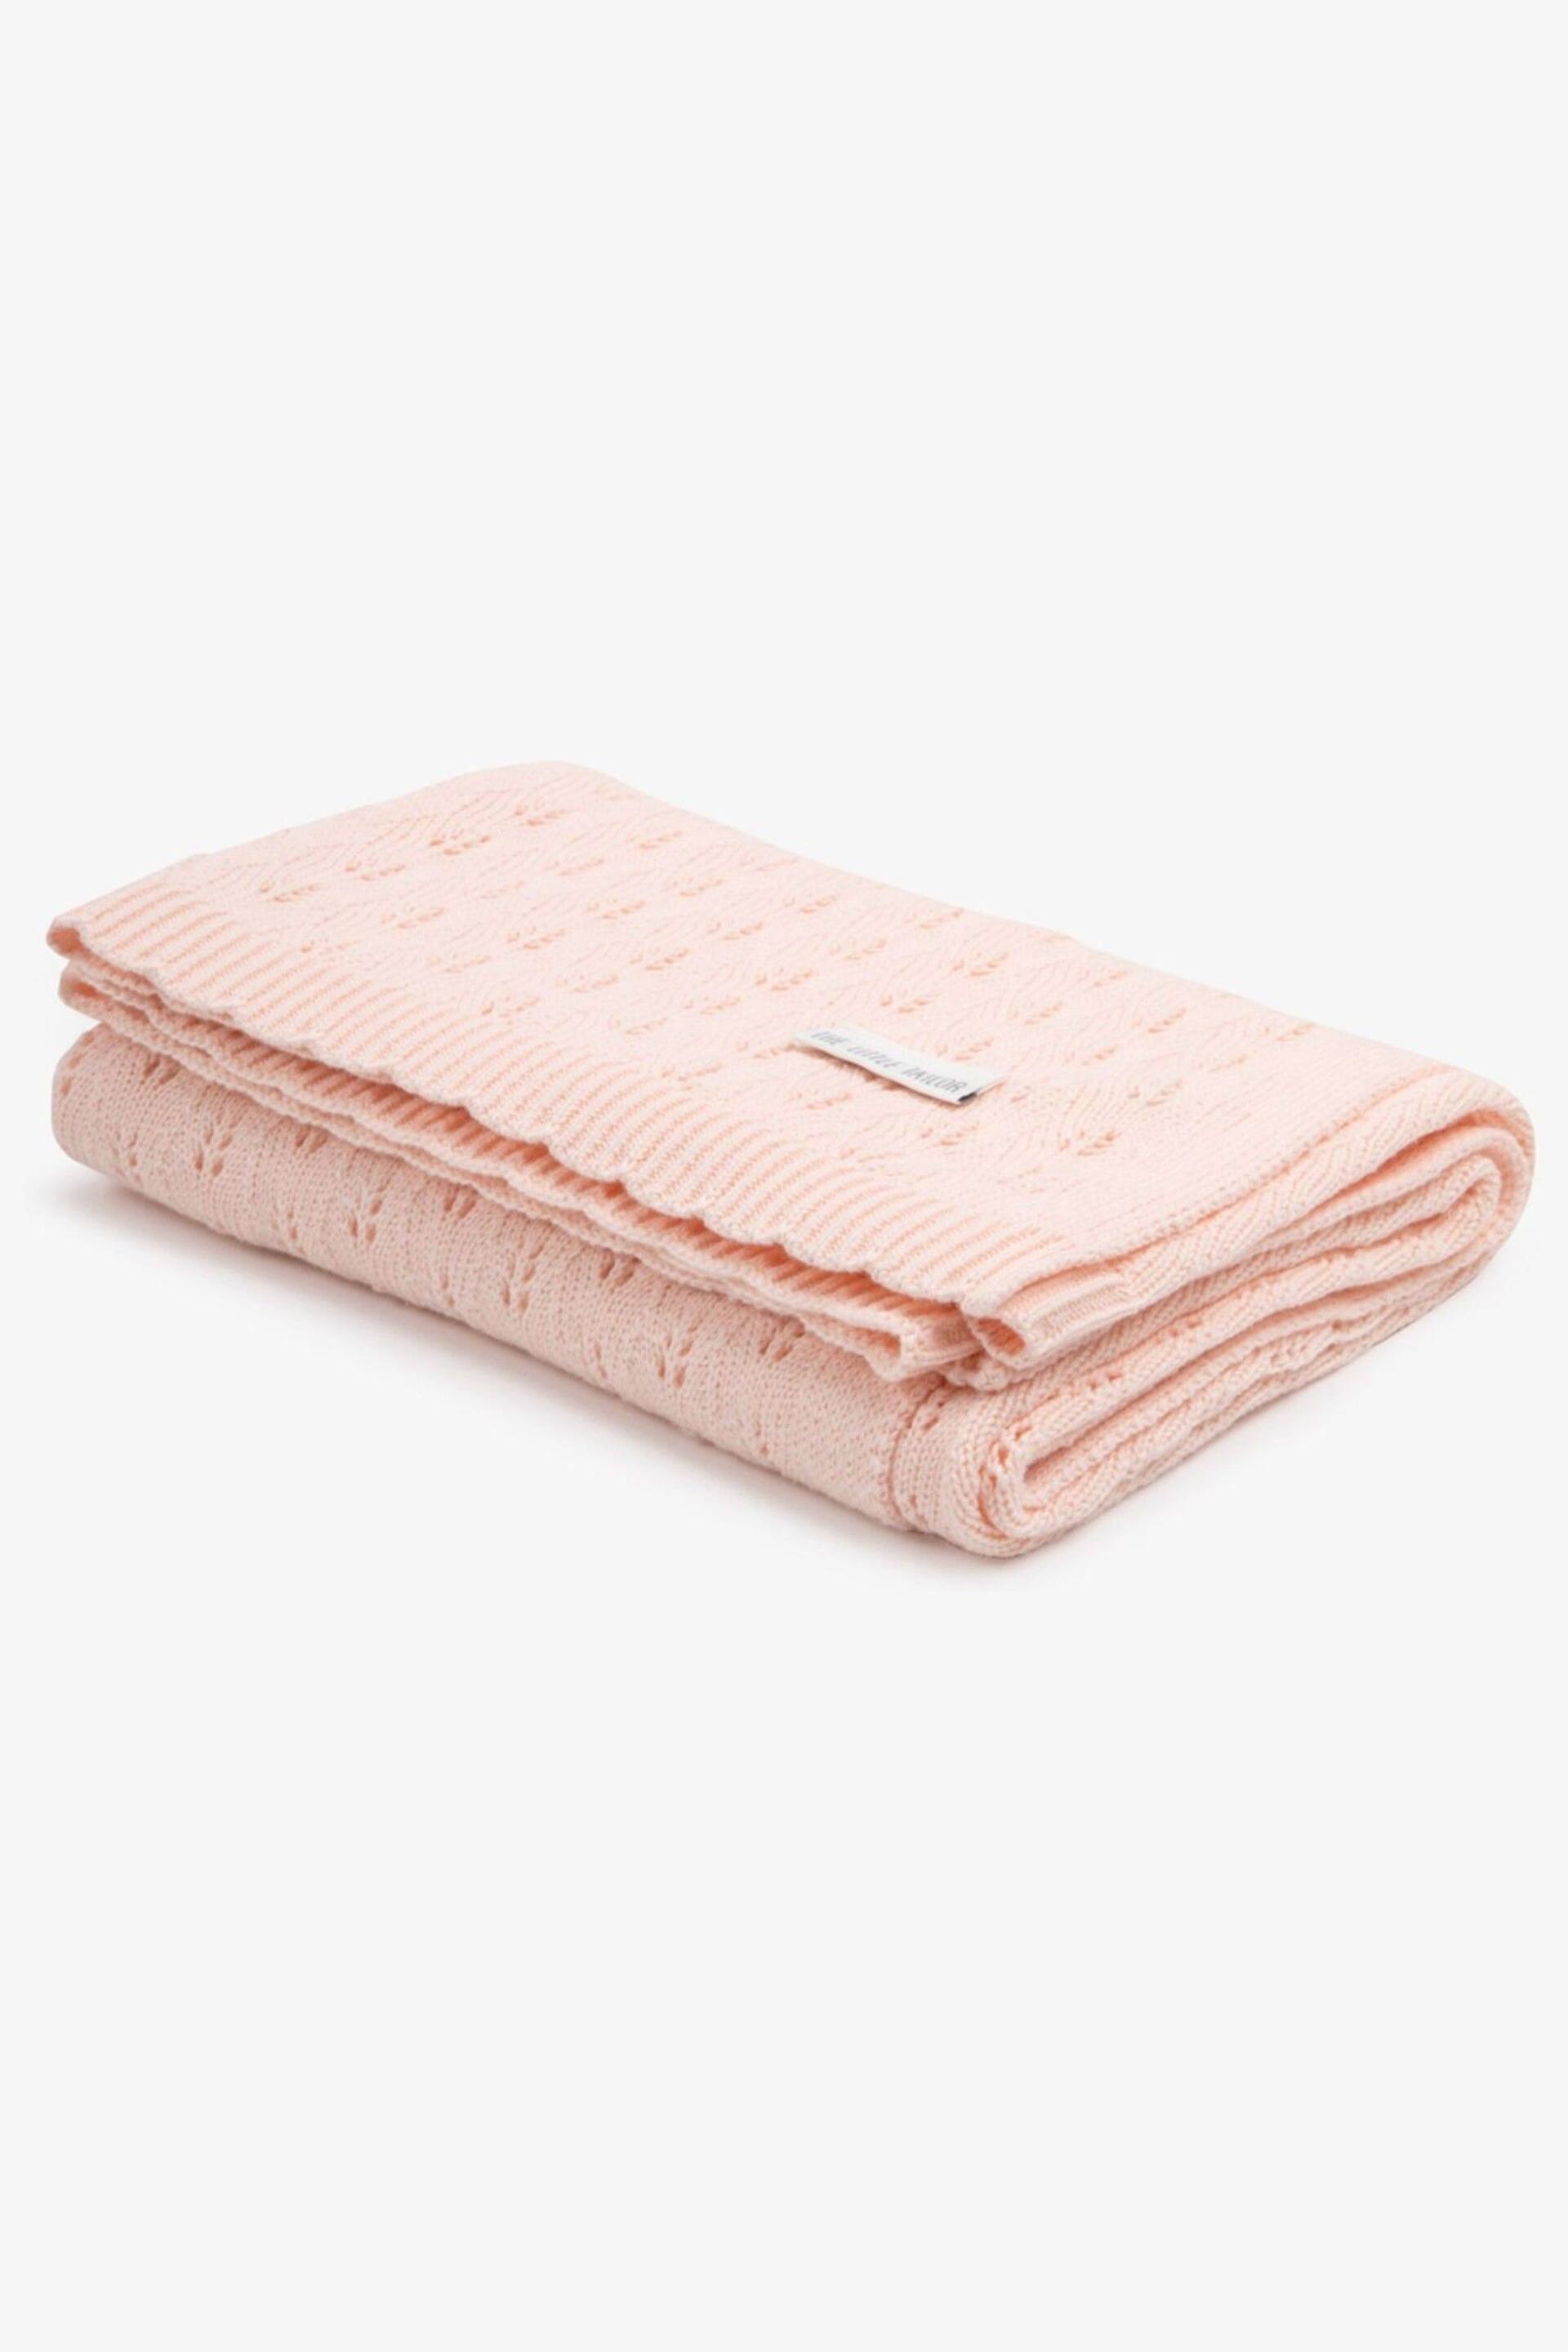 The Little Tailor Pink Cotton Pointelle Knitted Blanket - Image 1 of 5